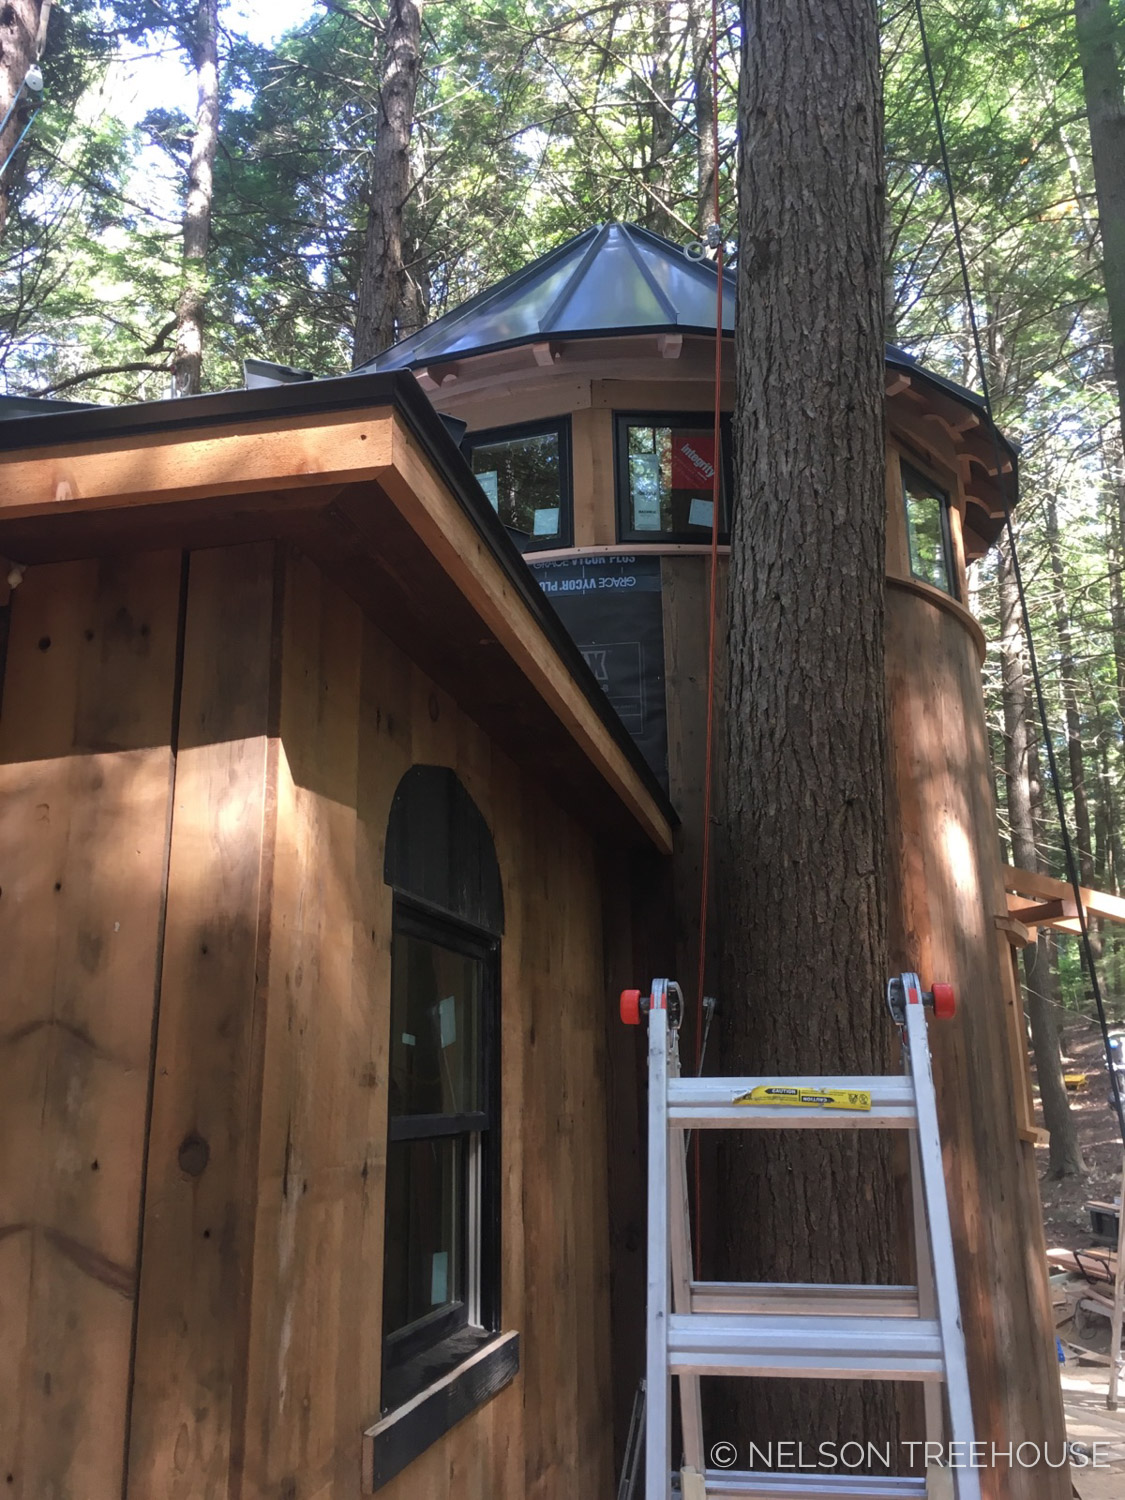  Wood Inlays above windows on the Magical Maine Treehouse 